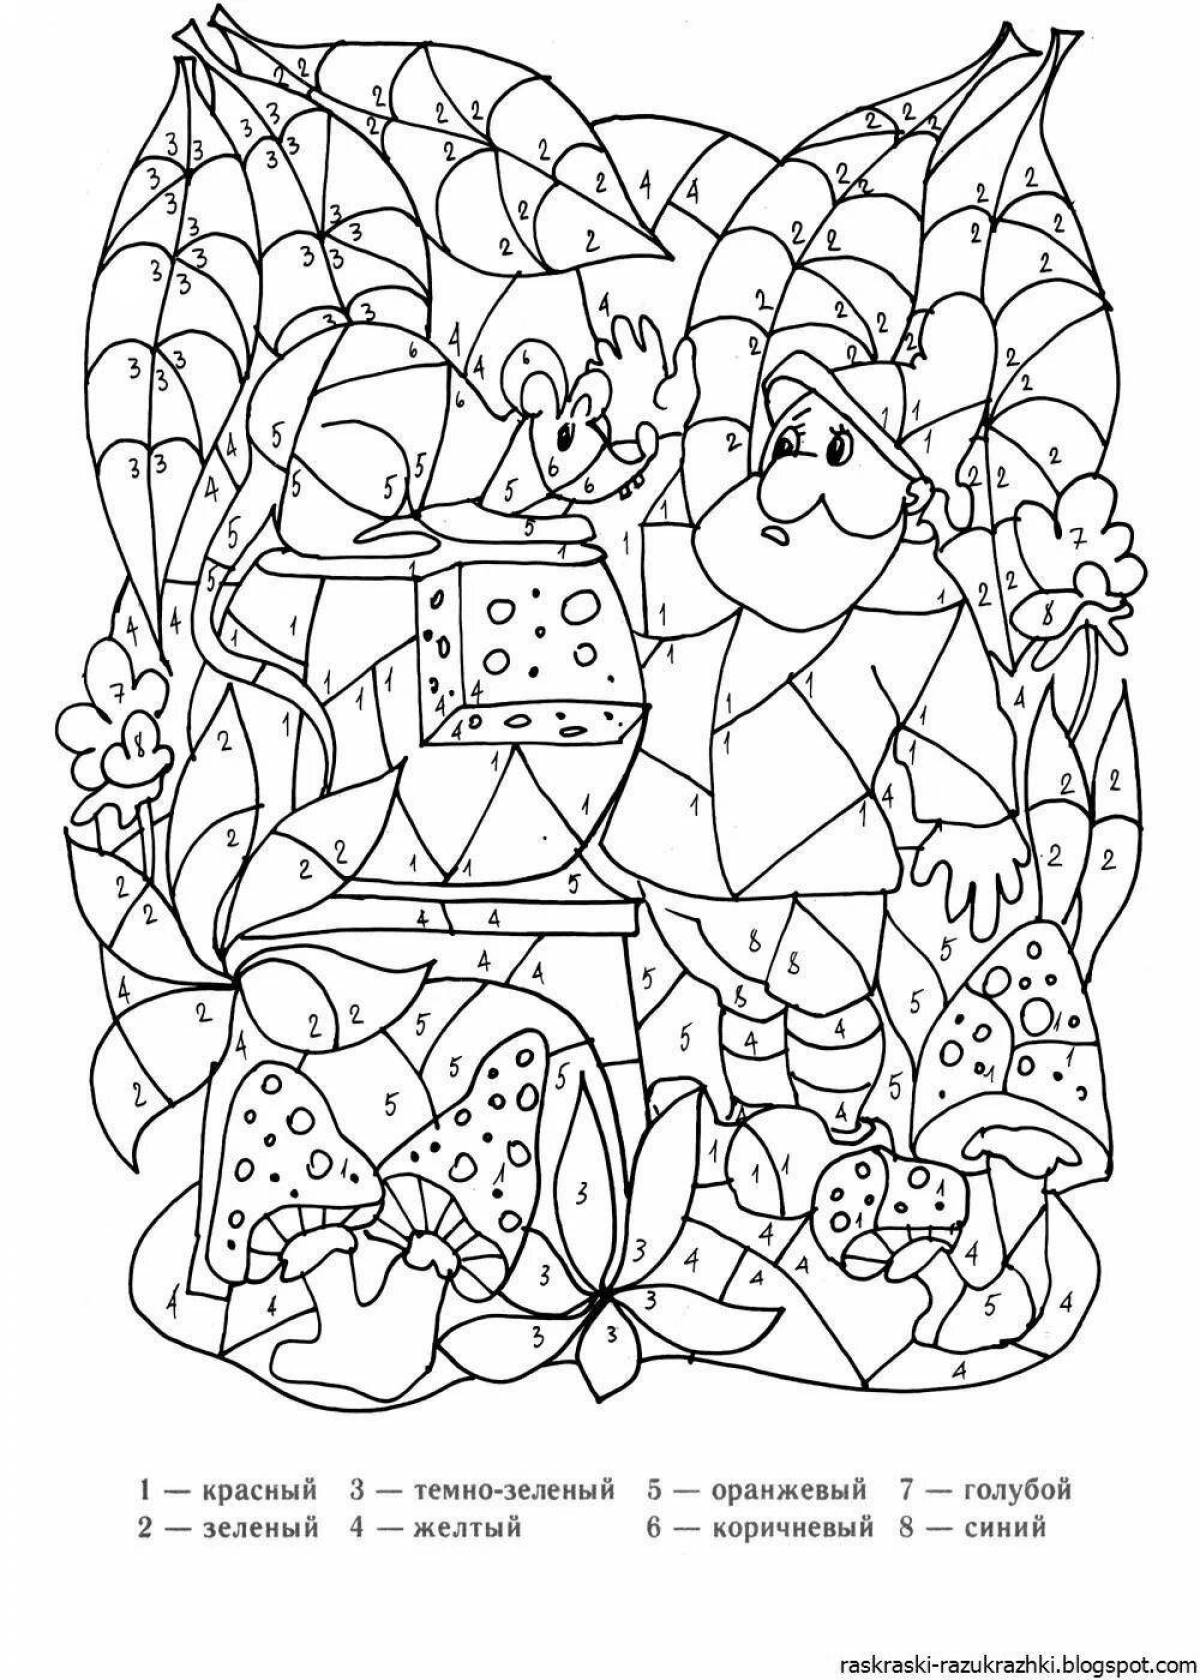 Fun number coloring page